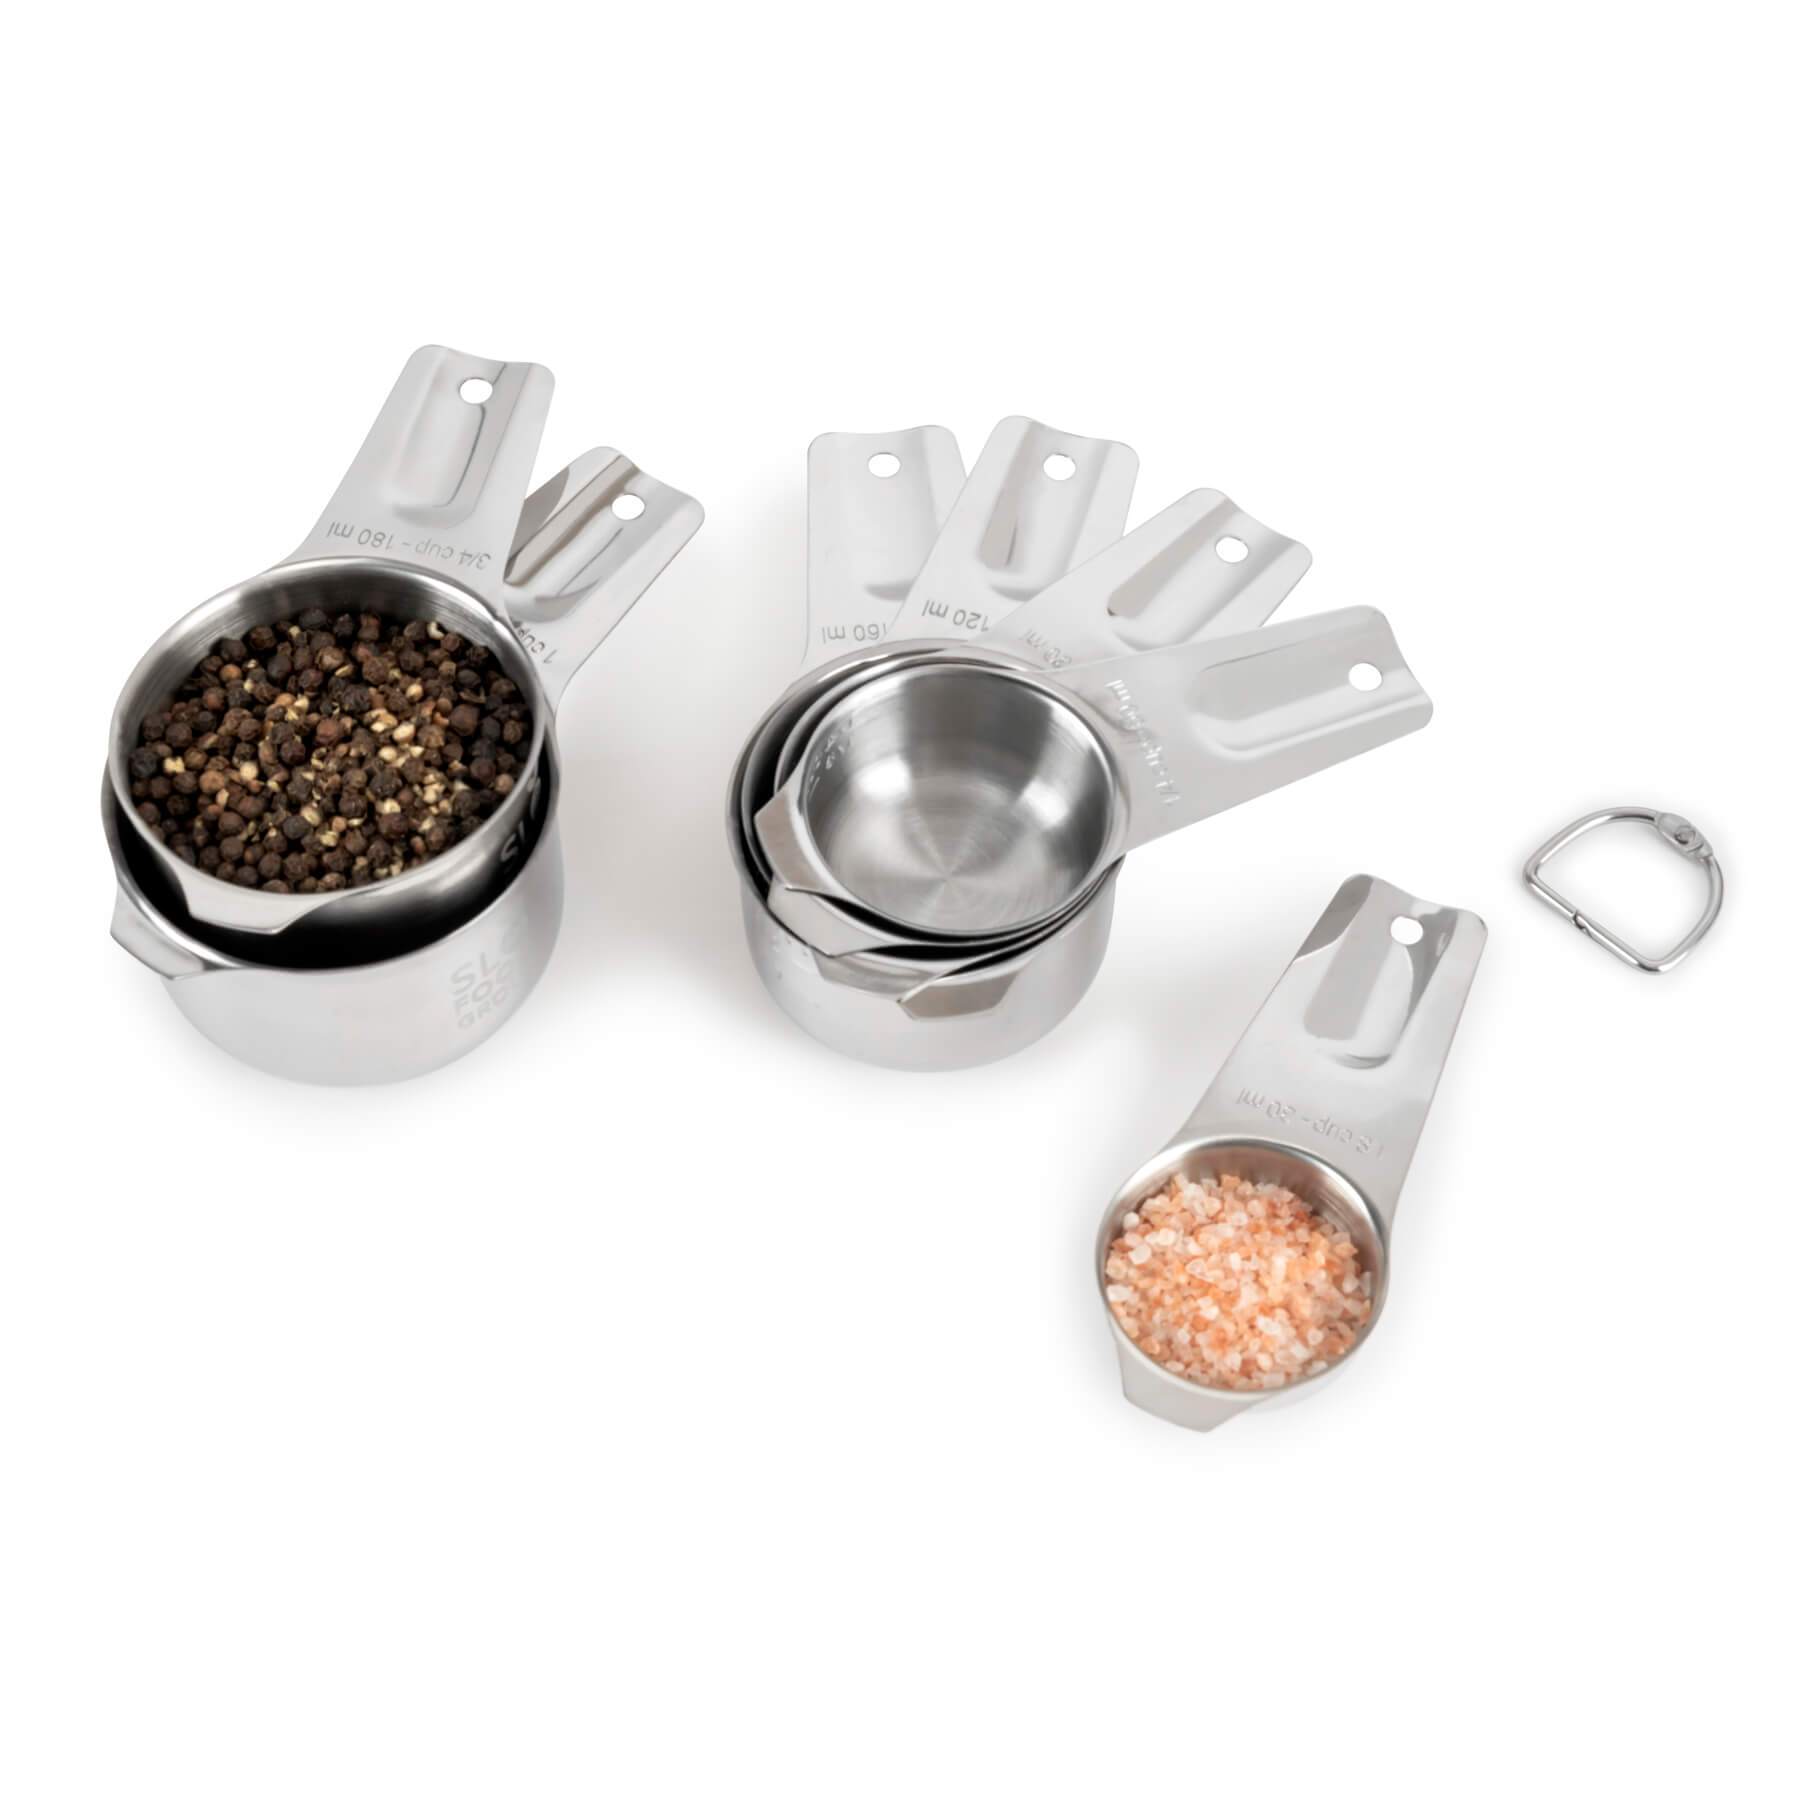 Measuring Cups Set of 2: 1/2 Cup 120 ml , Polished Stainless Steel